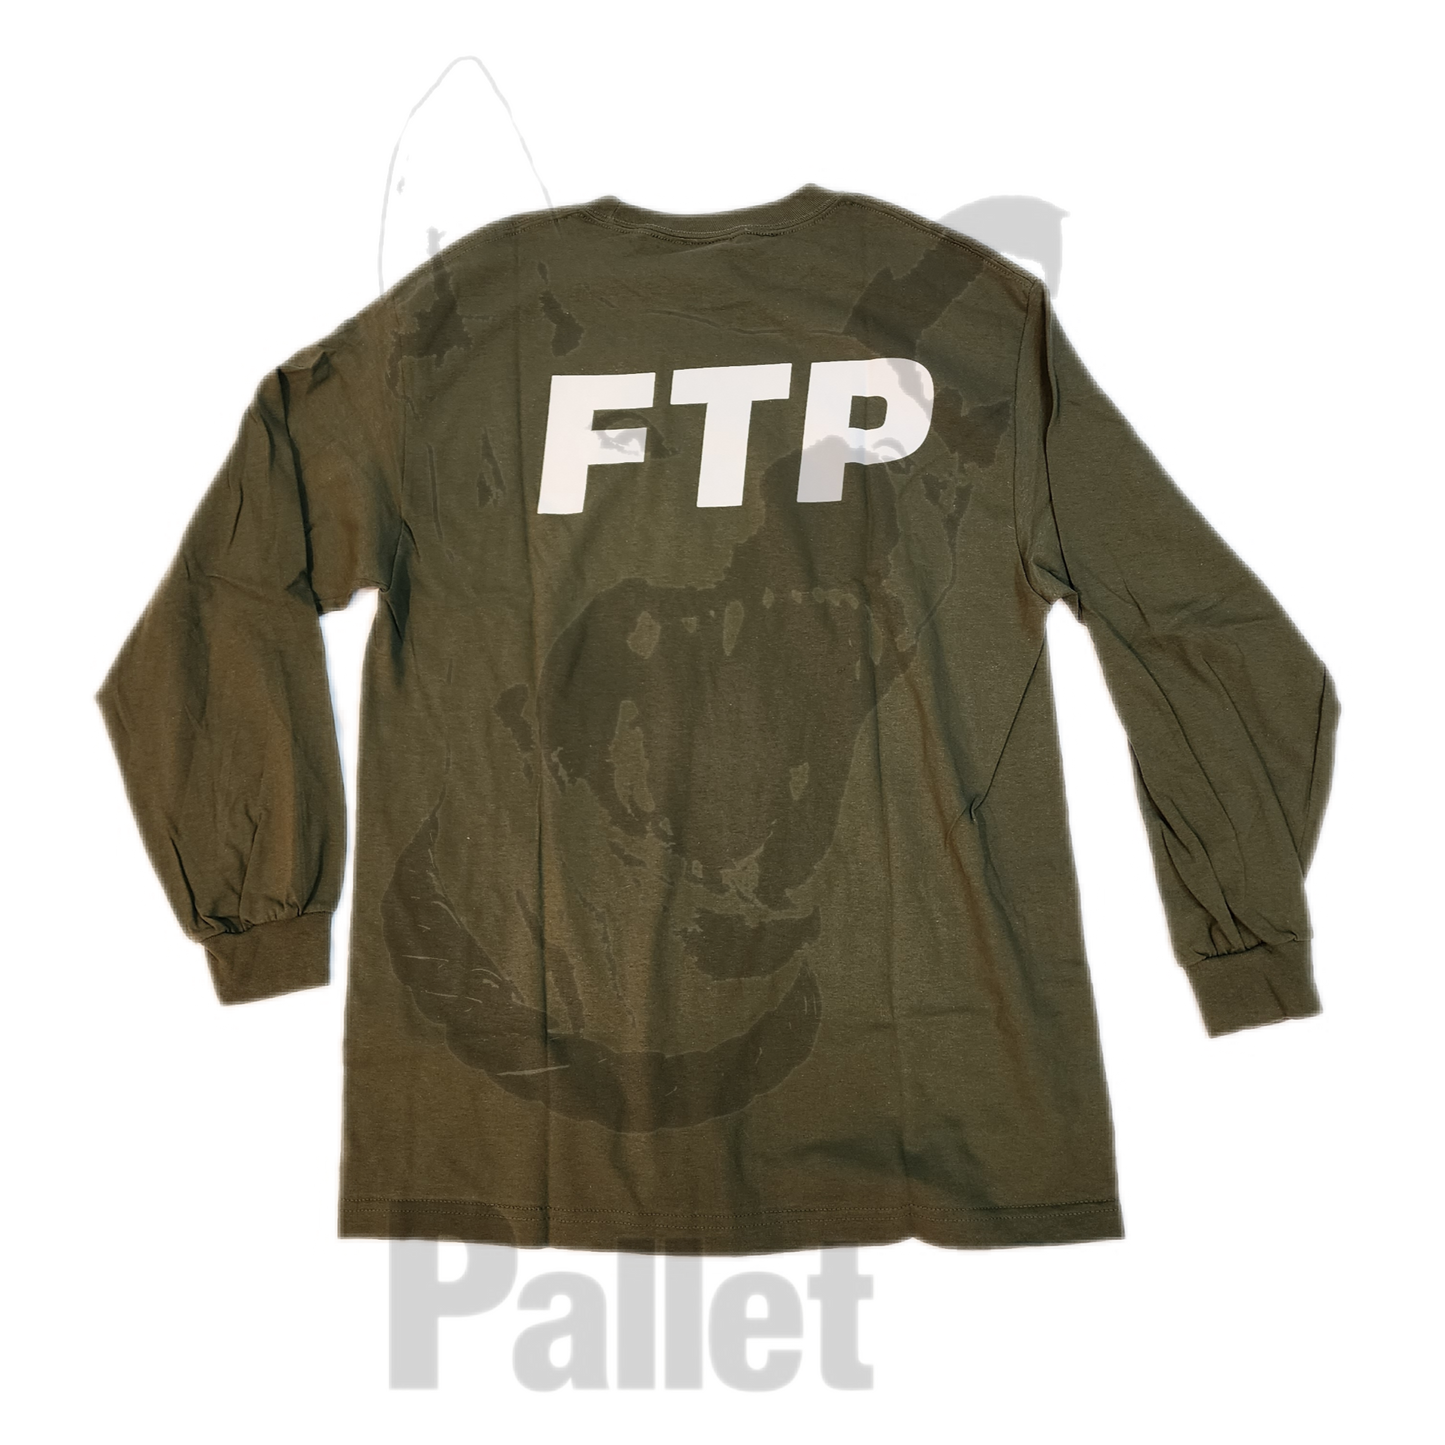 FTP - "Green Logo Tee" - Size Large